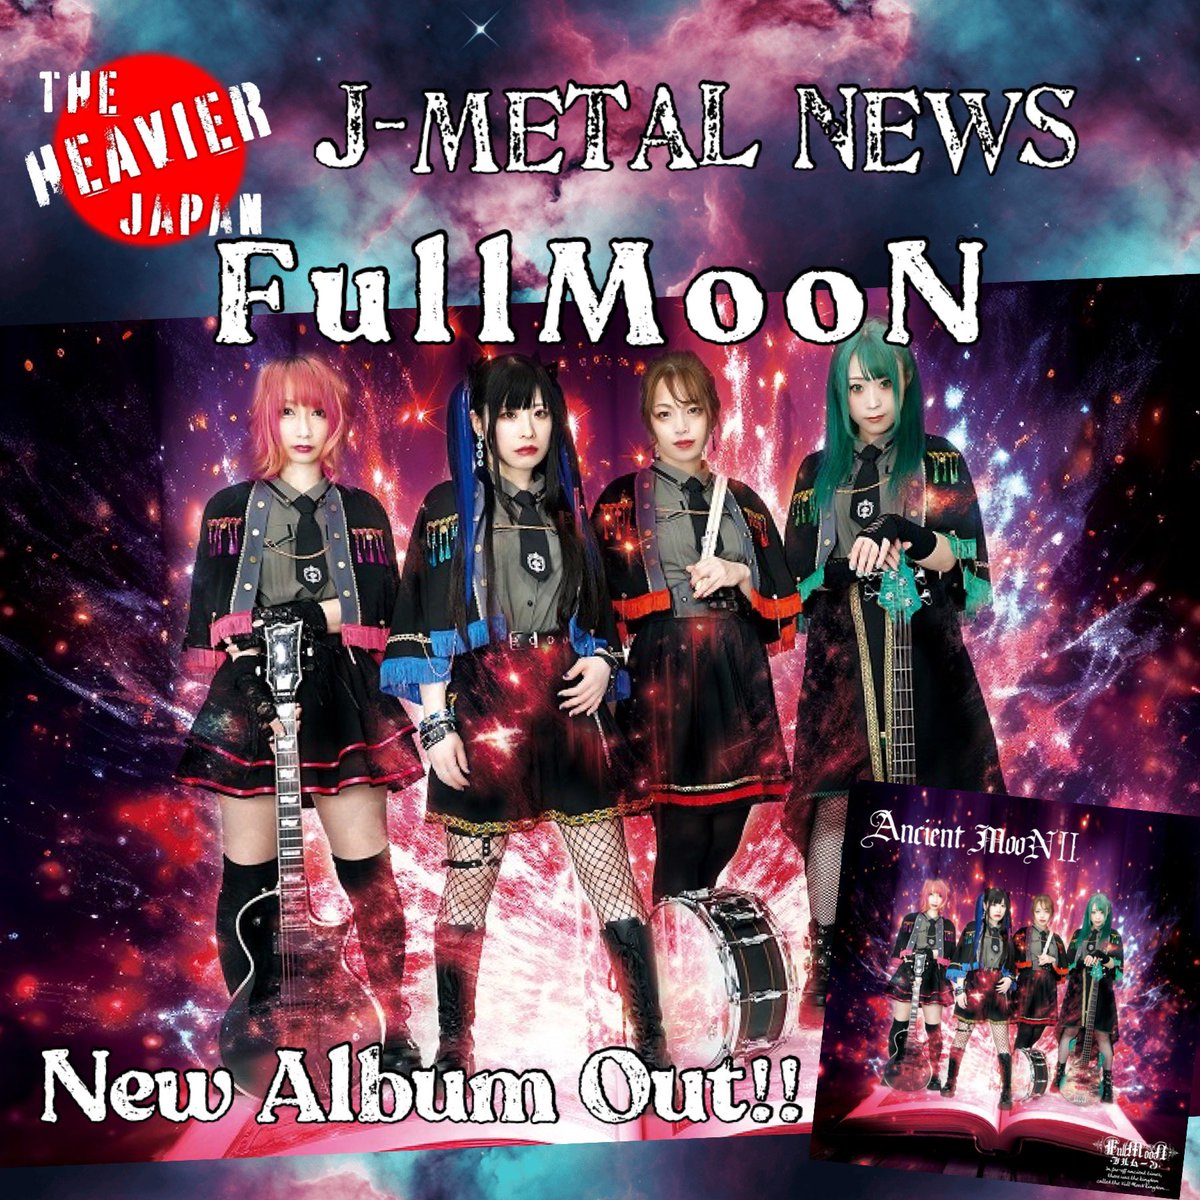 #jmetalnews Female hard rockers FullMooN released their new album “Ancient MooN II” featuring re-recorded tracks of their early material. Check out their new music video “blue max” from the album too! youtu.be/-20wN7KD9sA?si… @FullMooN_tw #japanesemetal #jrock #femalemetal